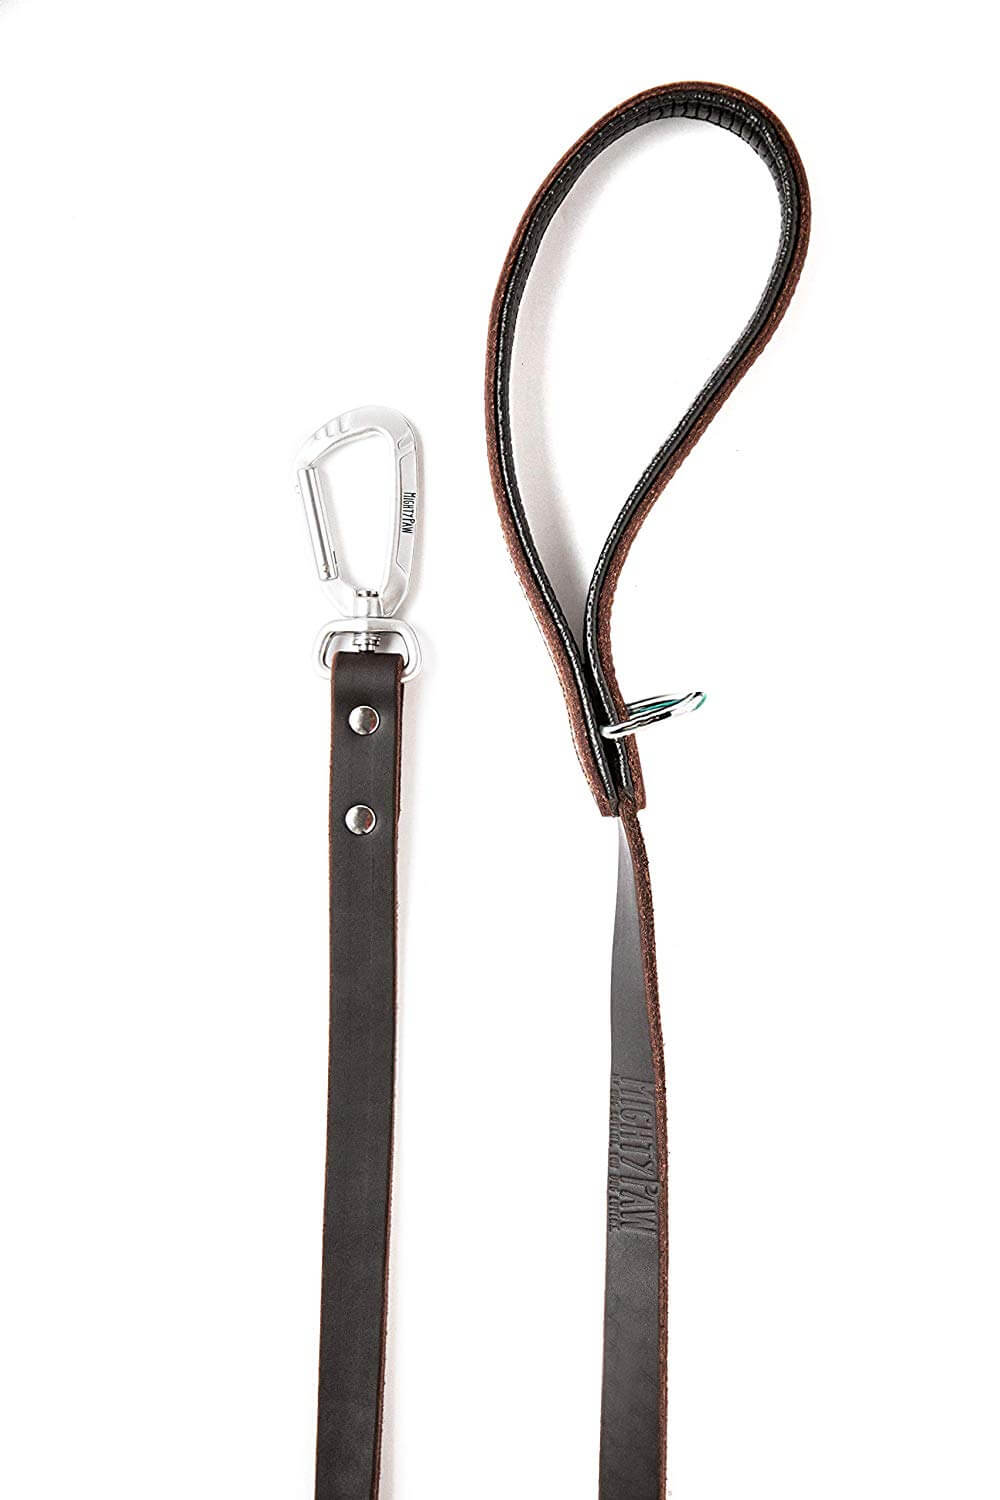 Mighty Paw Leather Dog Leash | 6 ft Leash. Super Soft Padded Handle Leather Lead with Extra D-Ring for Waste Bags. Strong